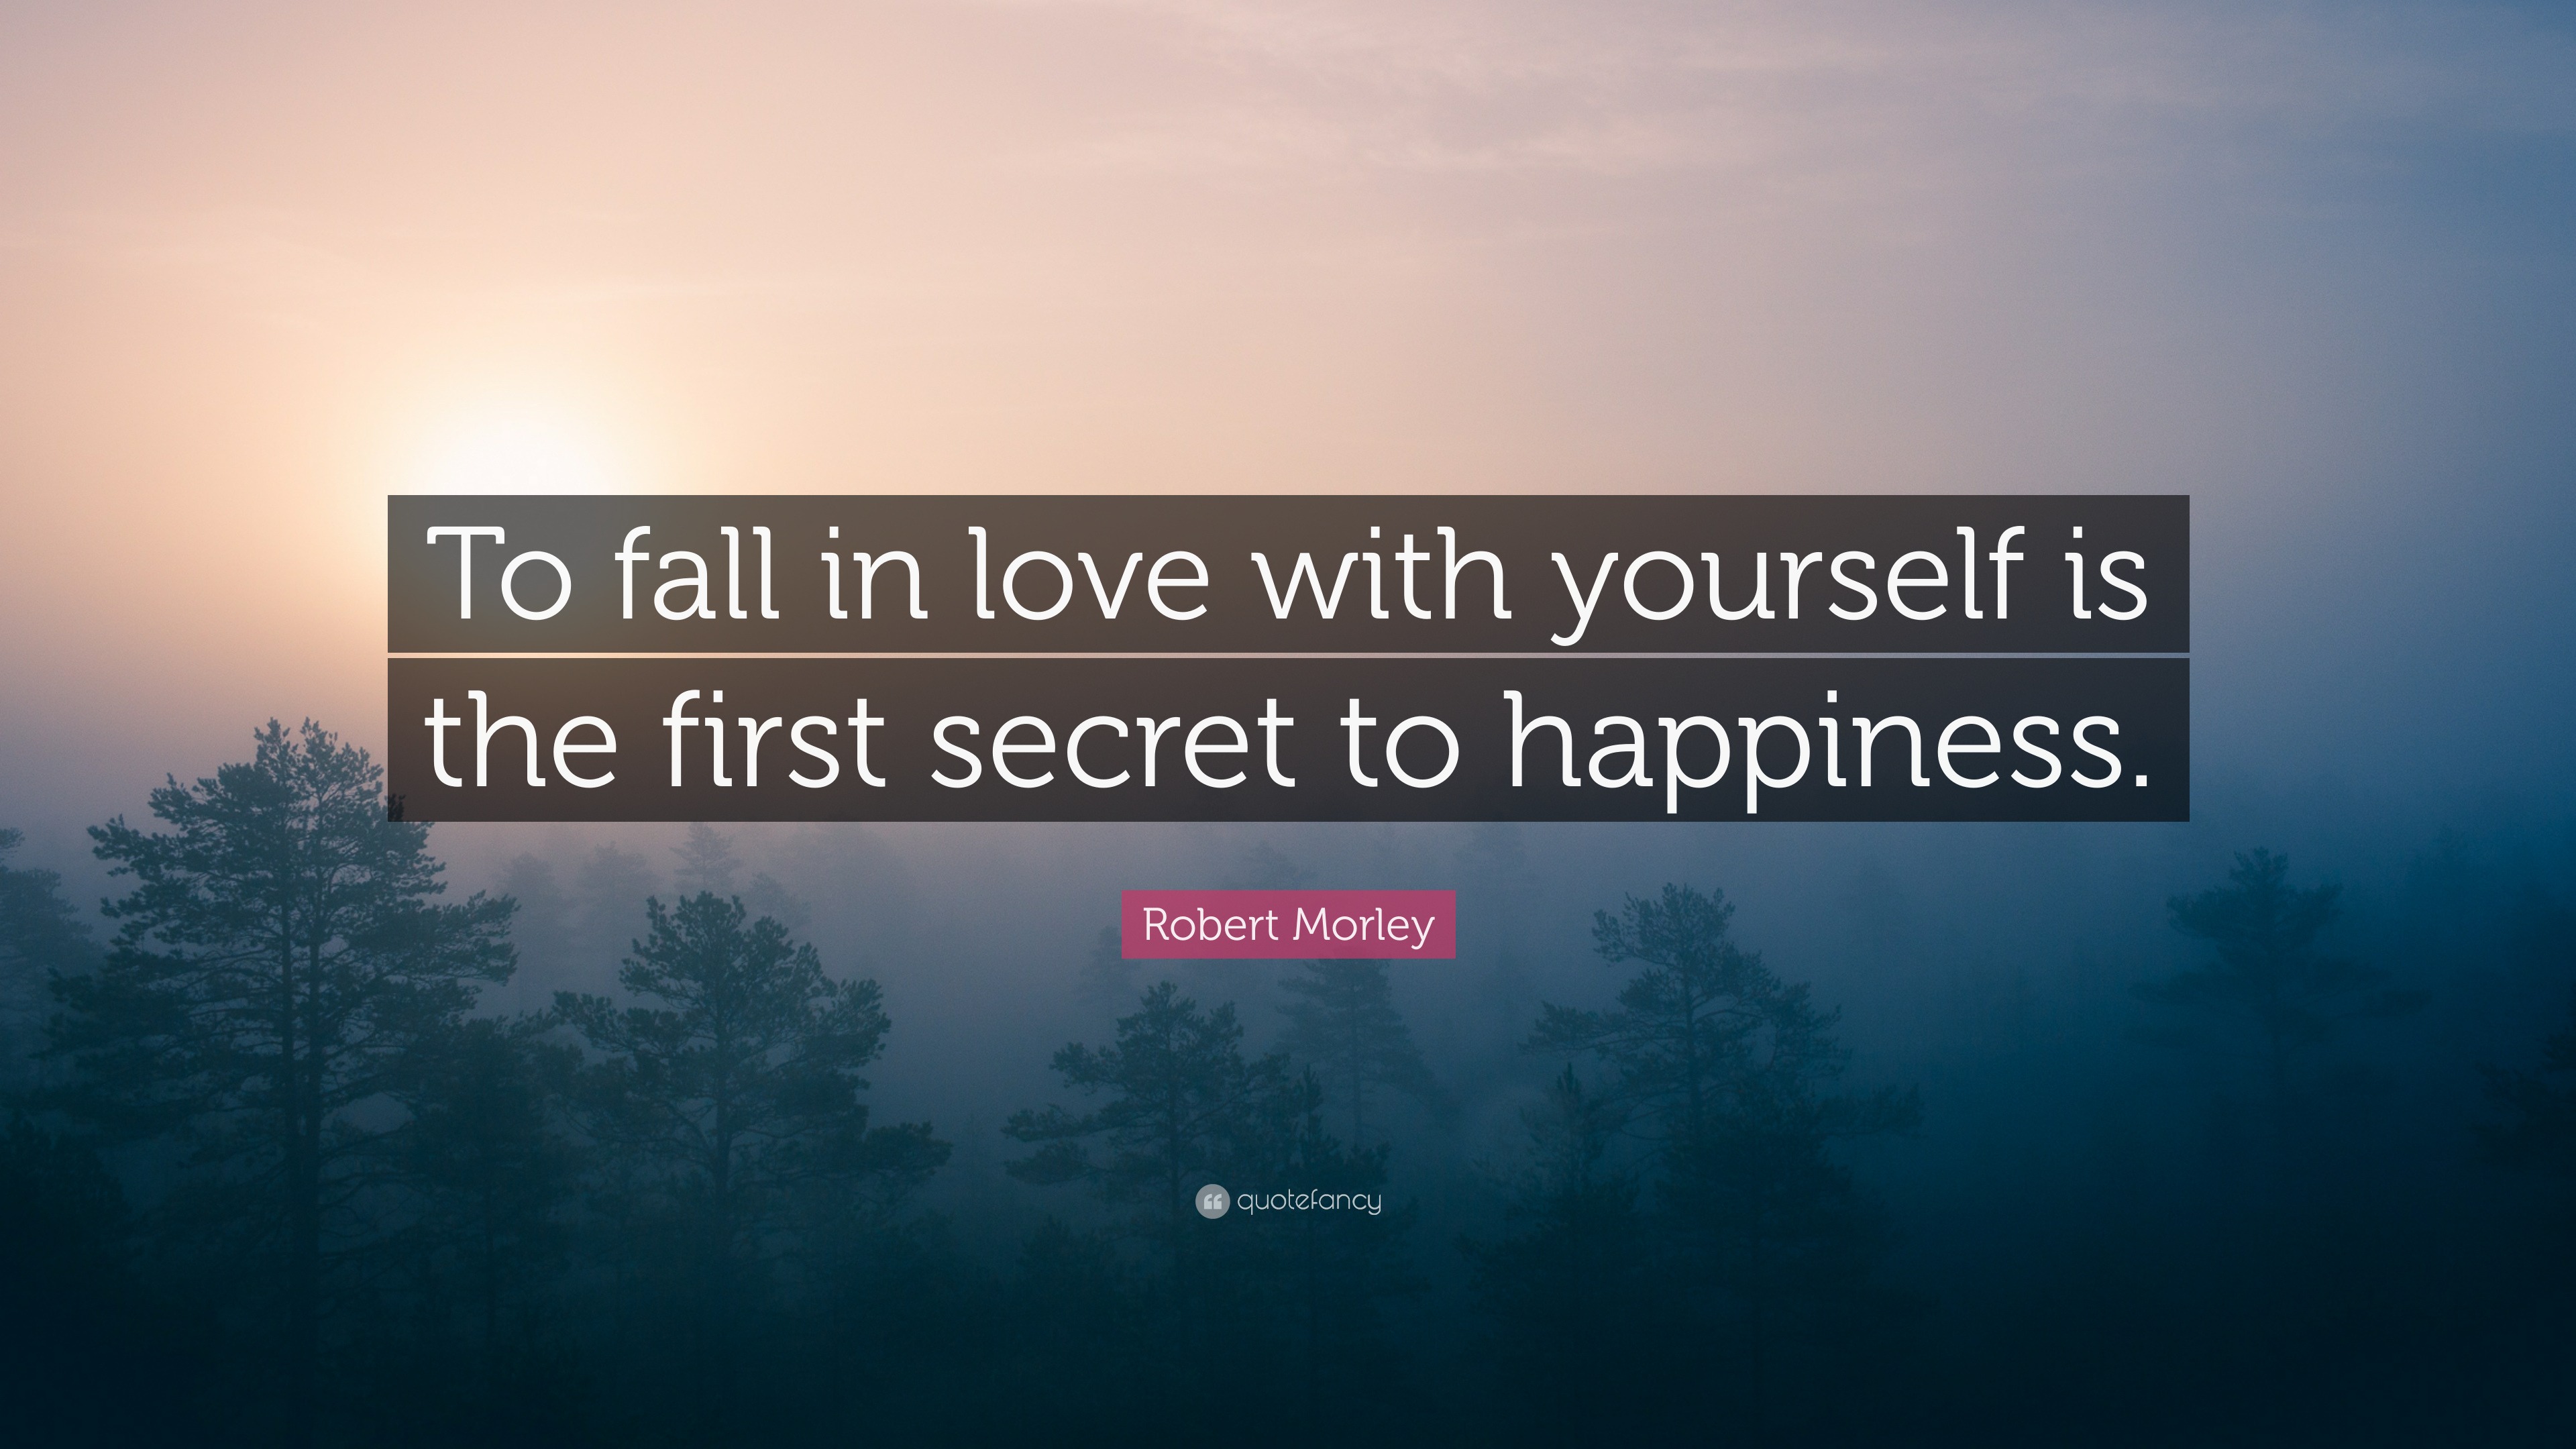 Robert Morley Quote To Fall In Love With Yourself Is The First Secret To Happiness